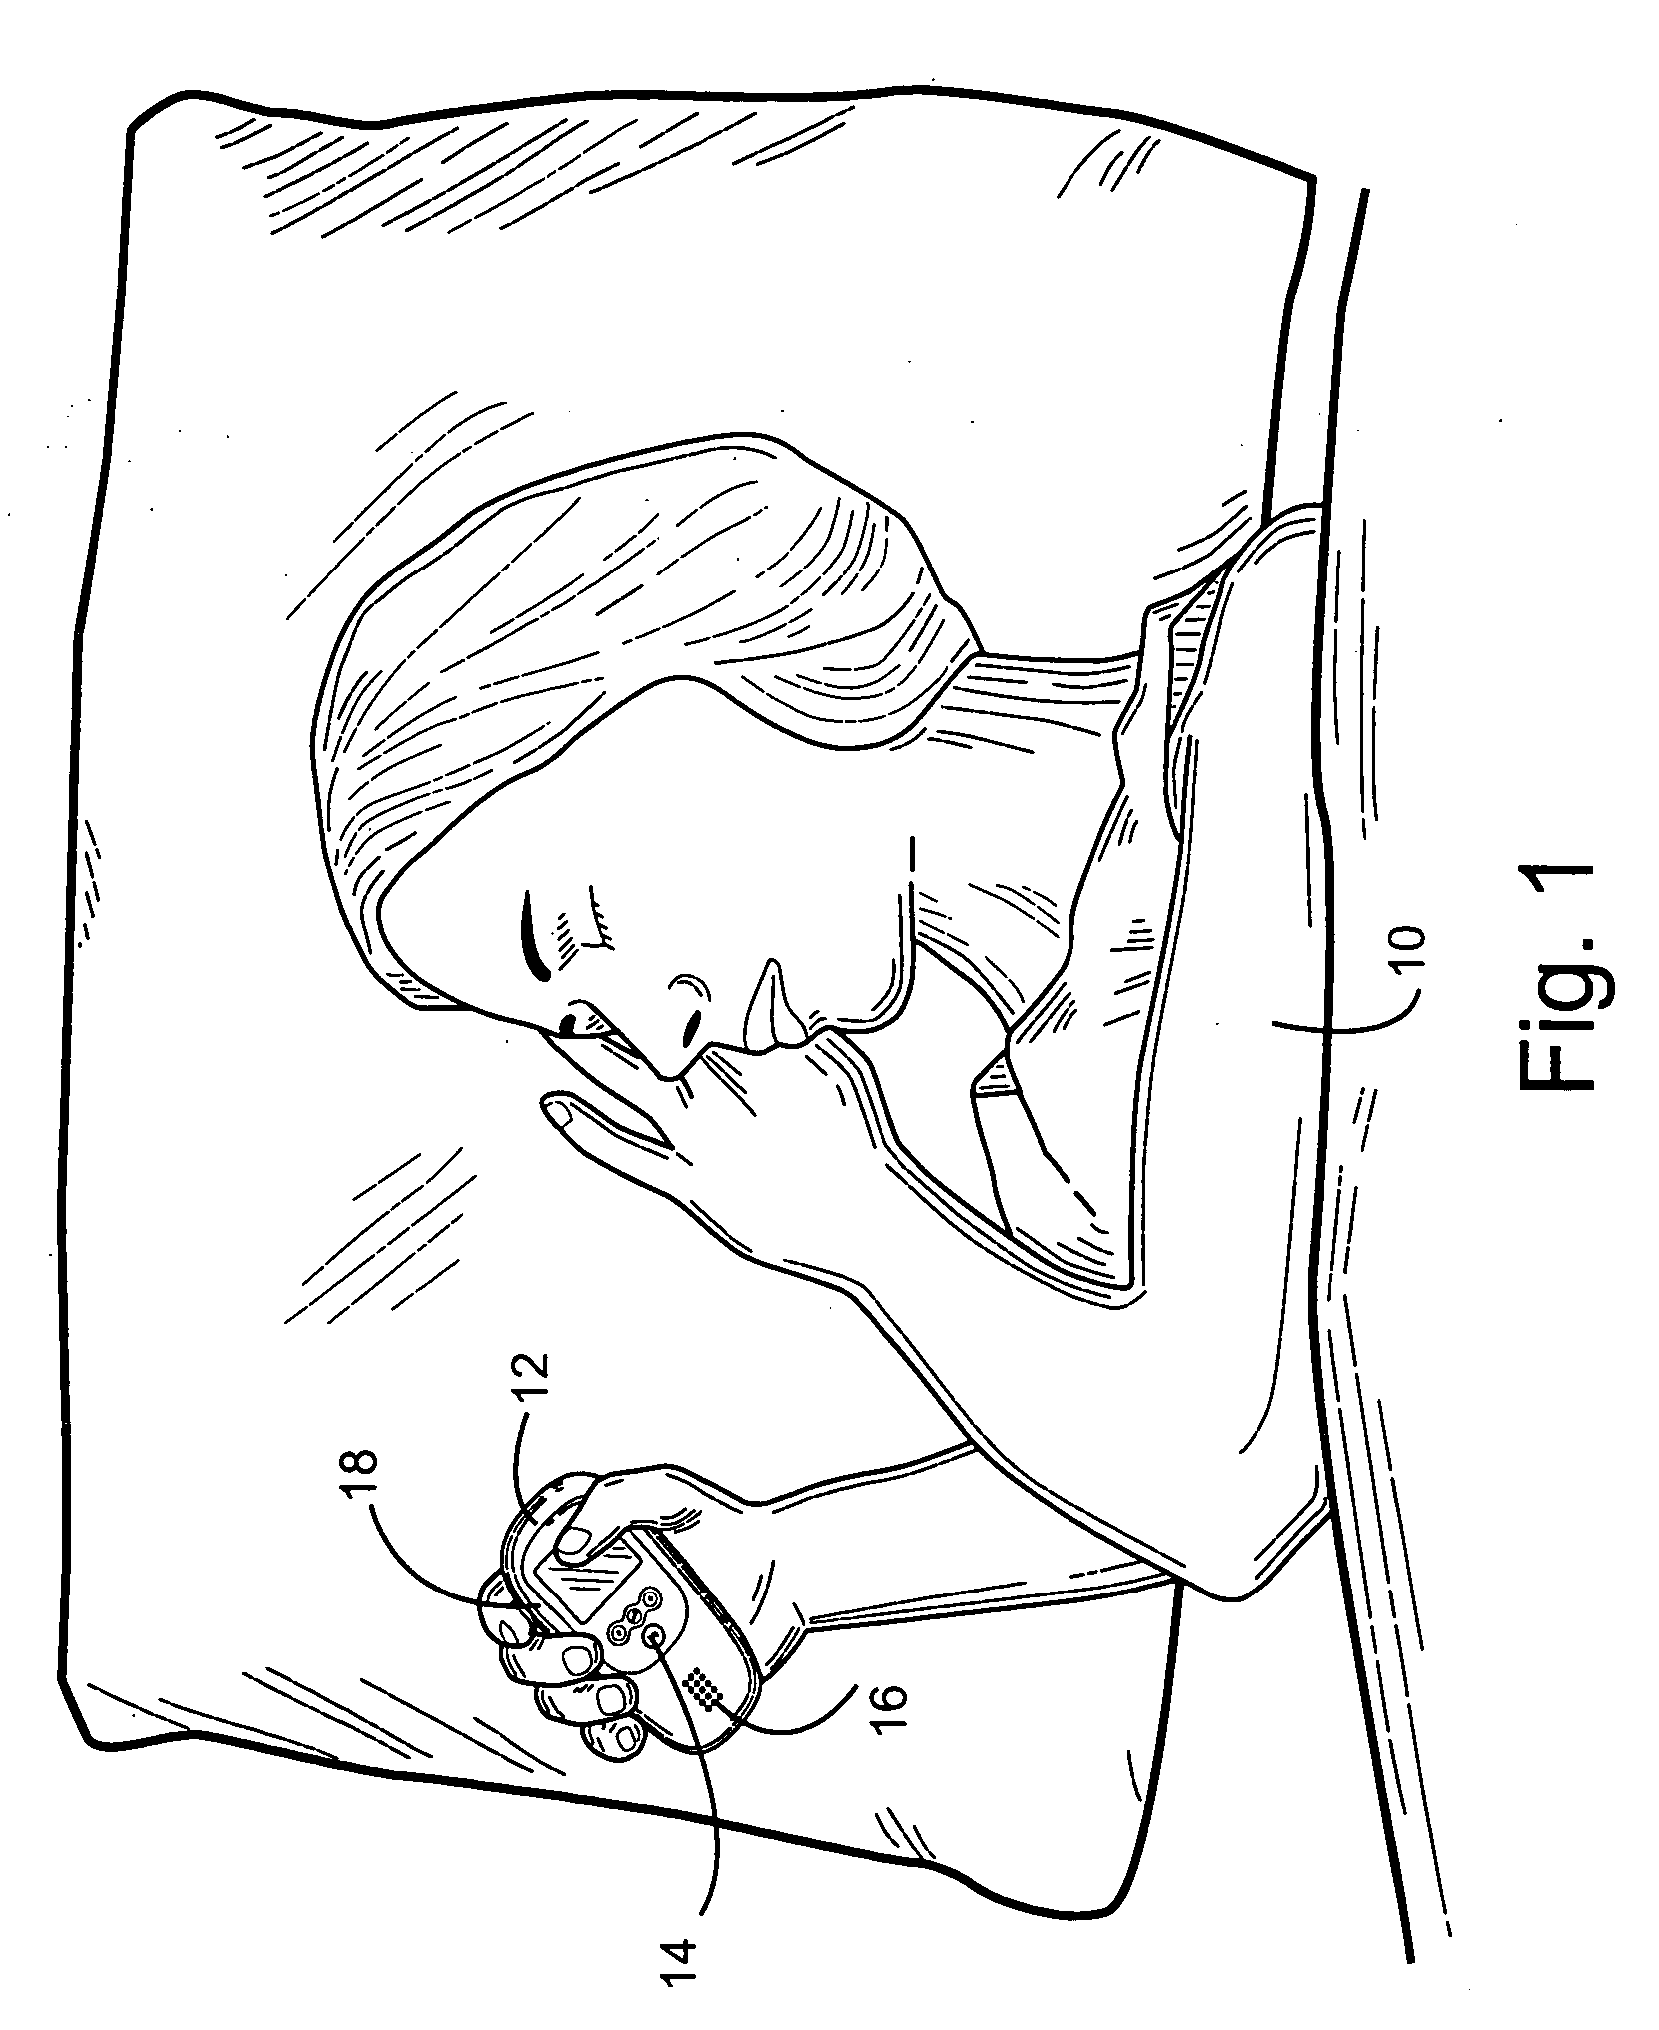 Insomnia assessment and treatment device and method